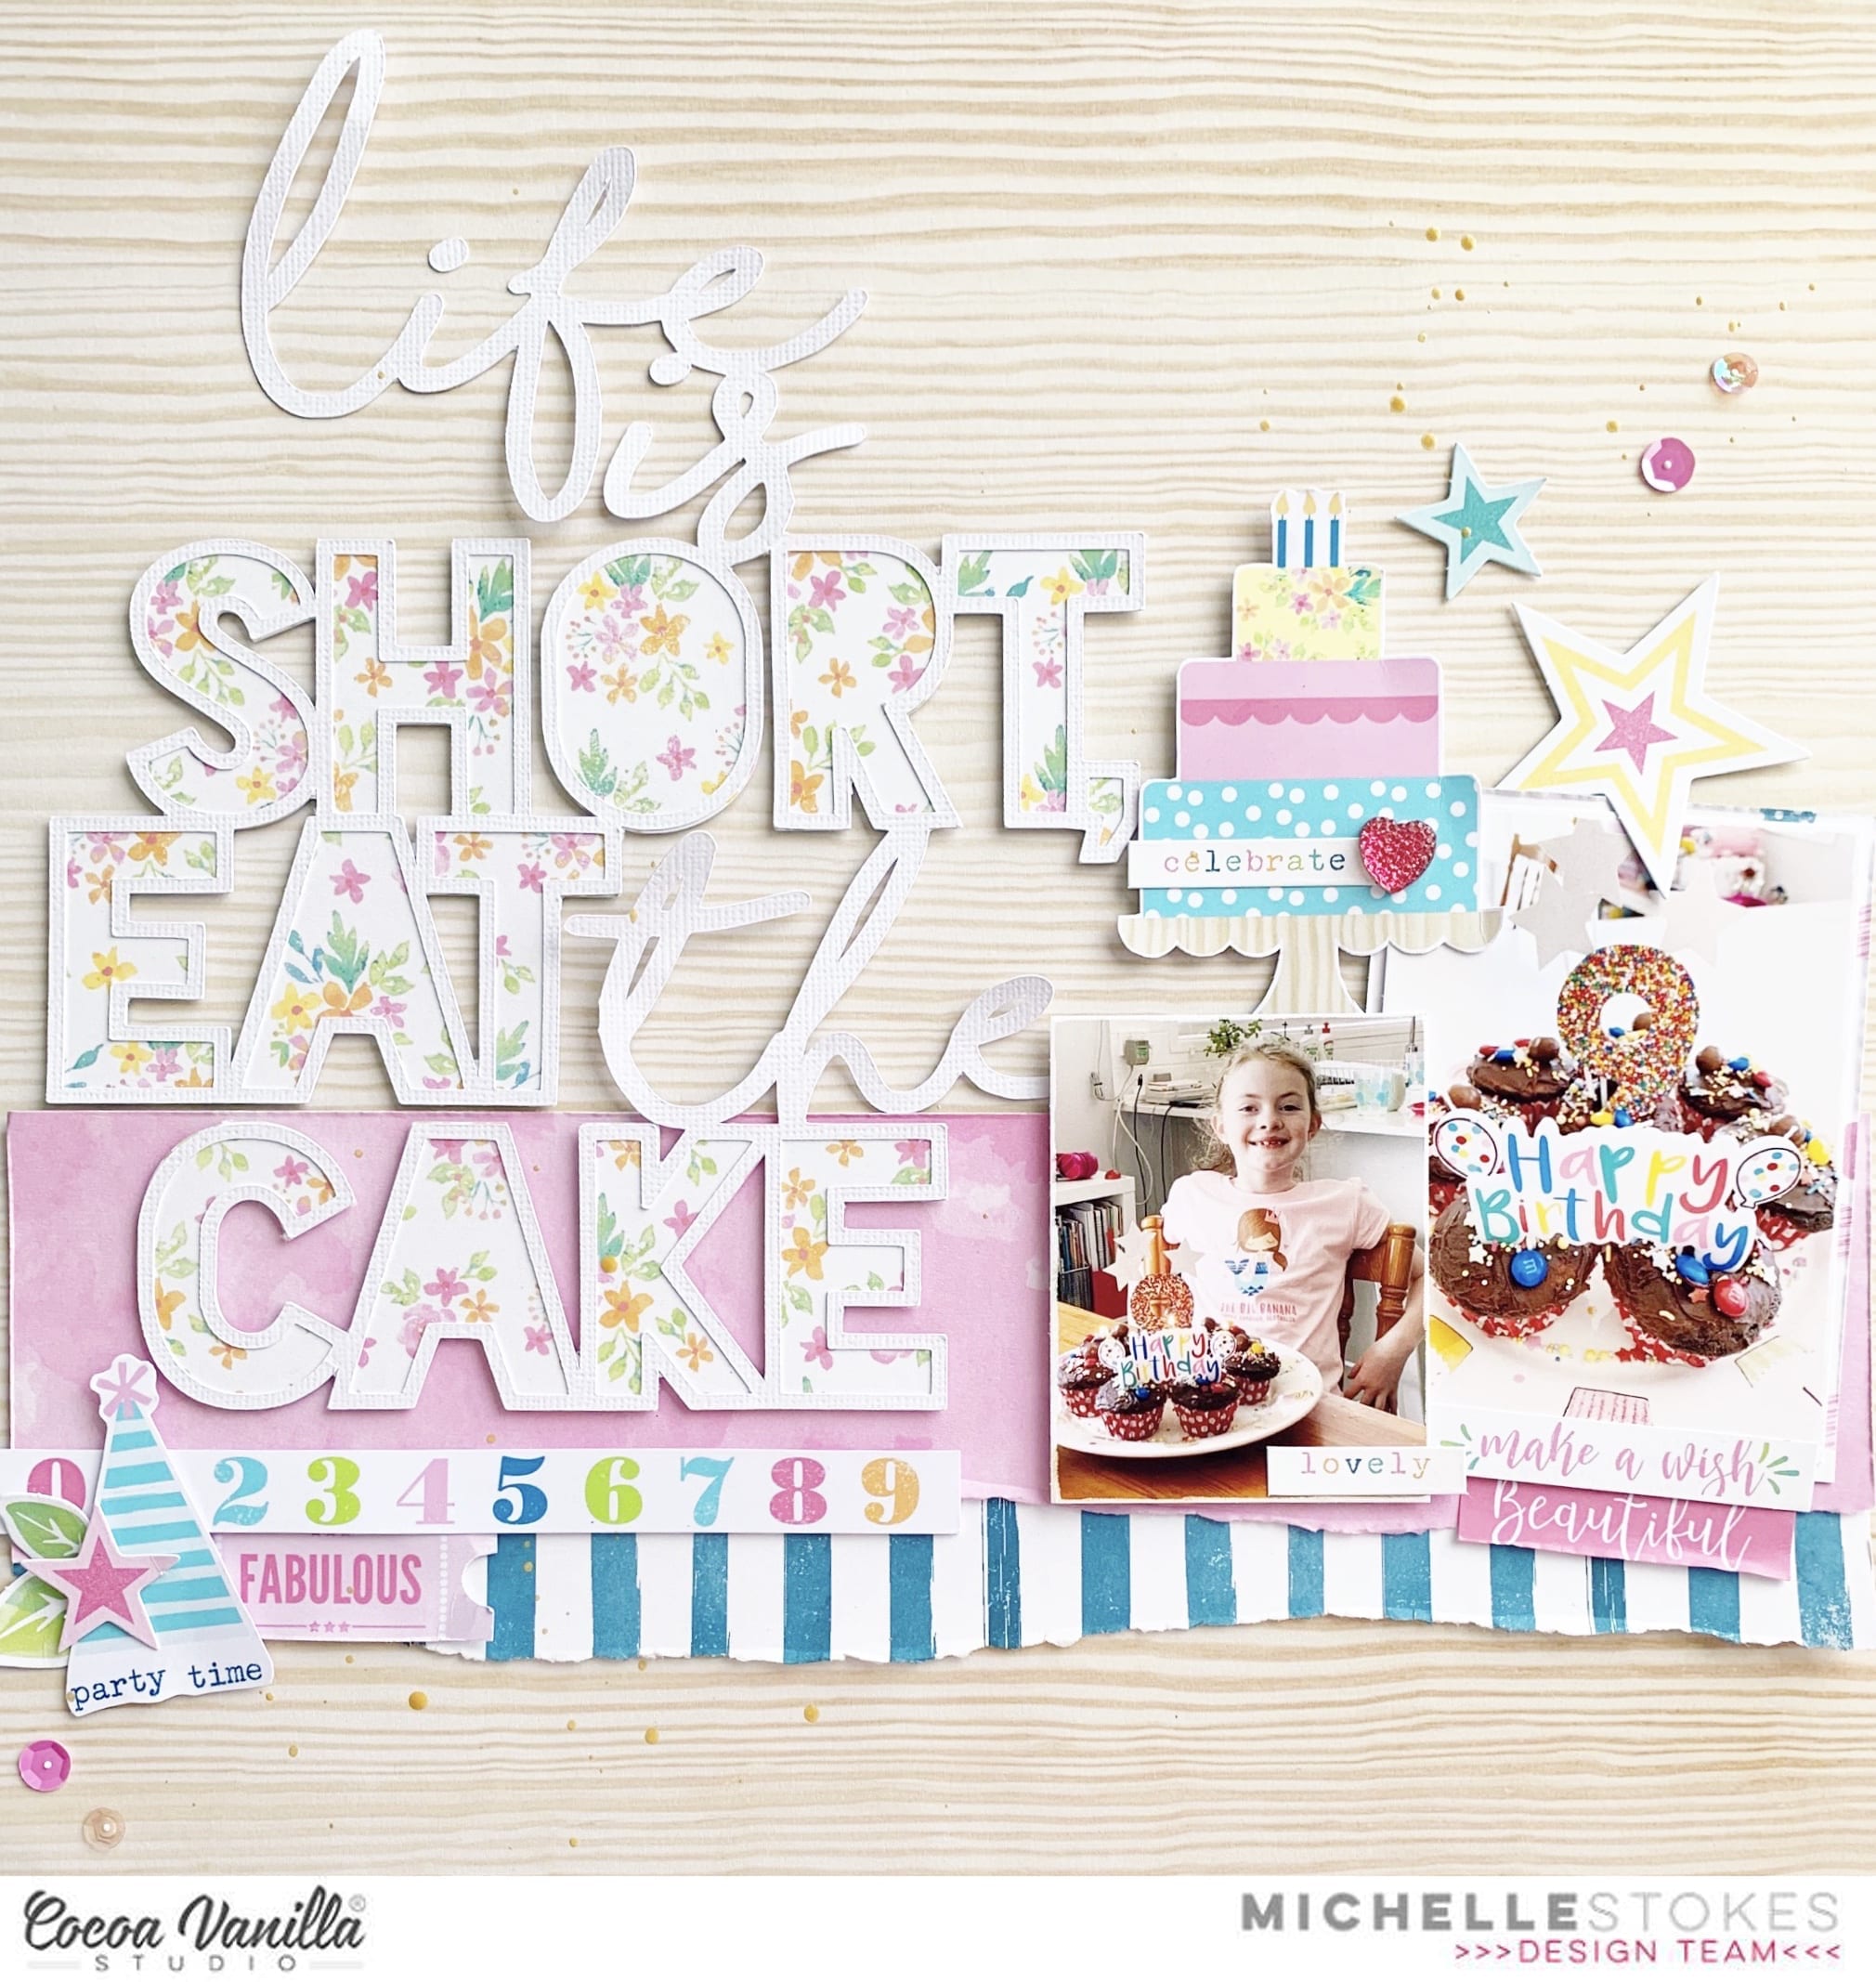 Life is short, Eat the Cake | Make a Wish | Michelle Stokes